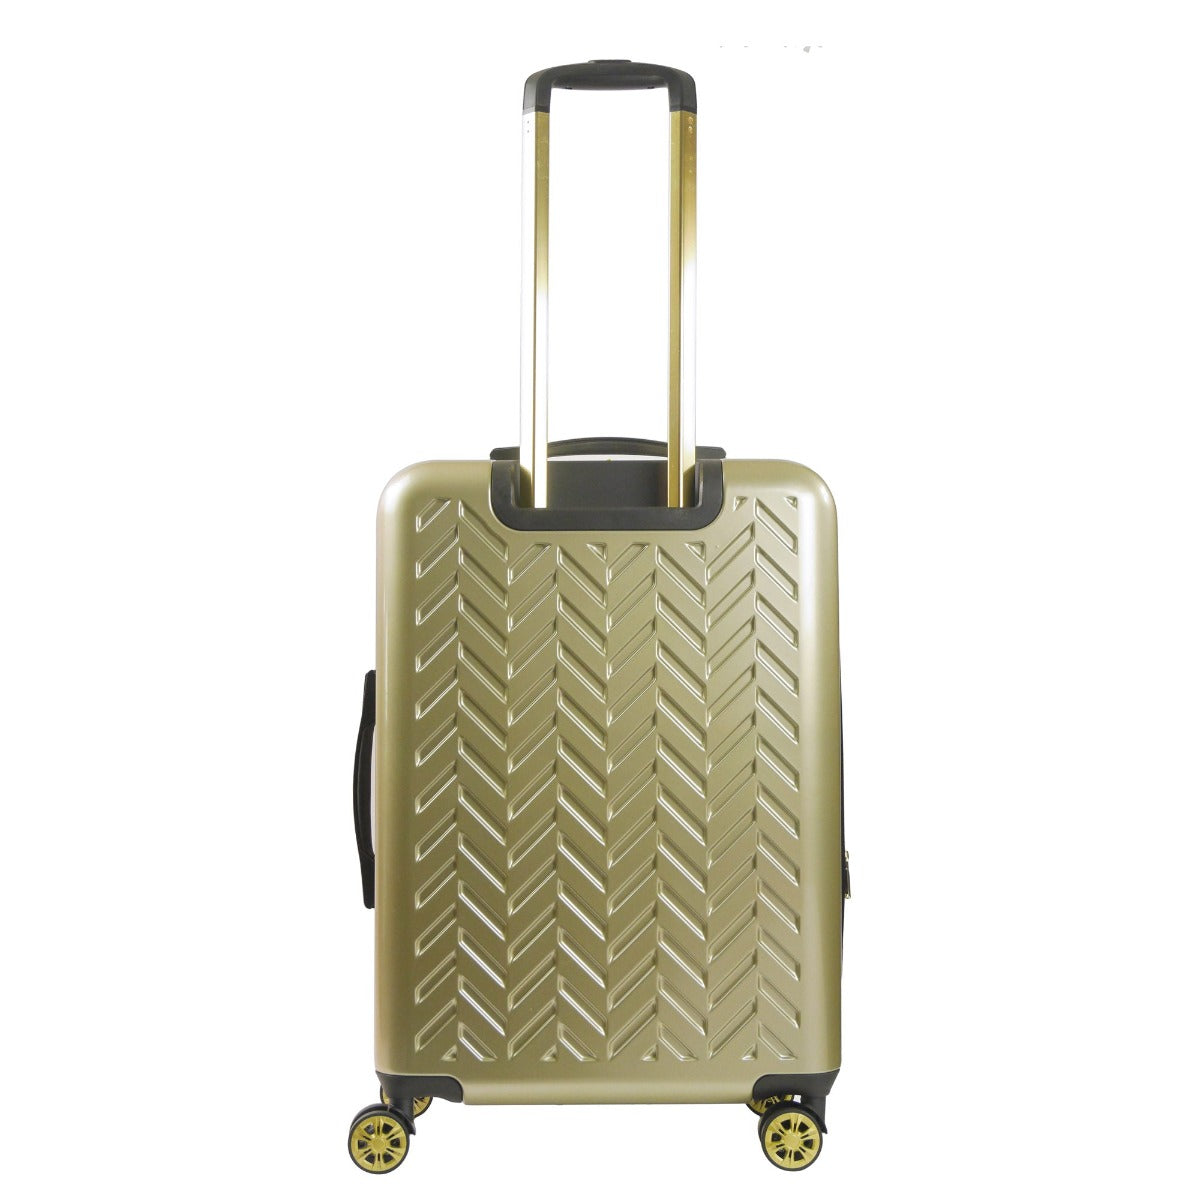 Ful Grove 27 inch hardside spinner suitcase checked gold luggage black details